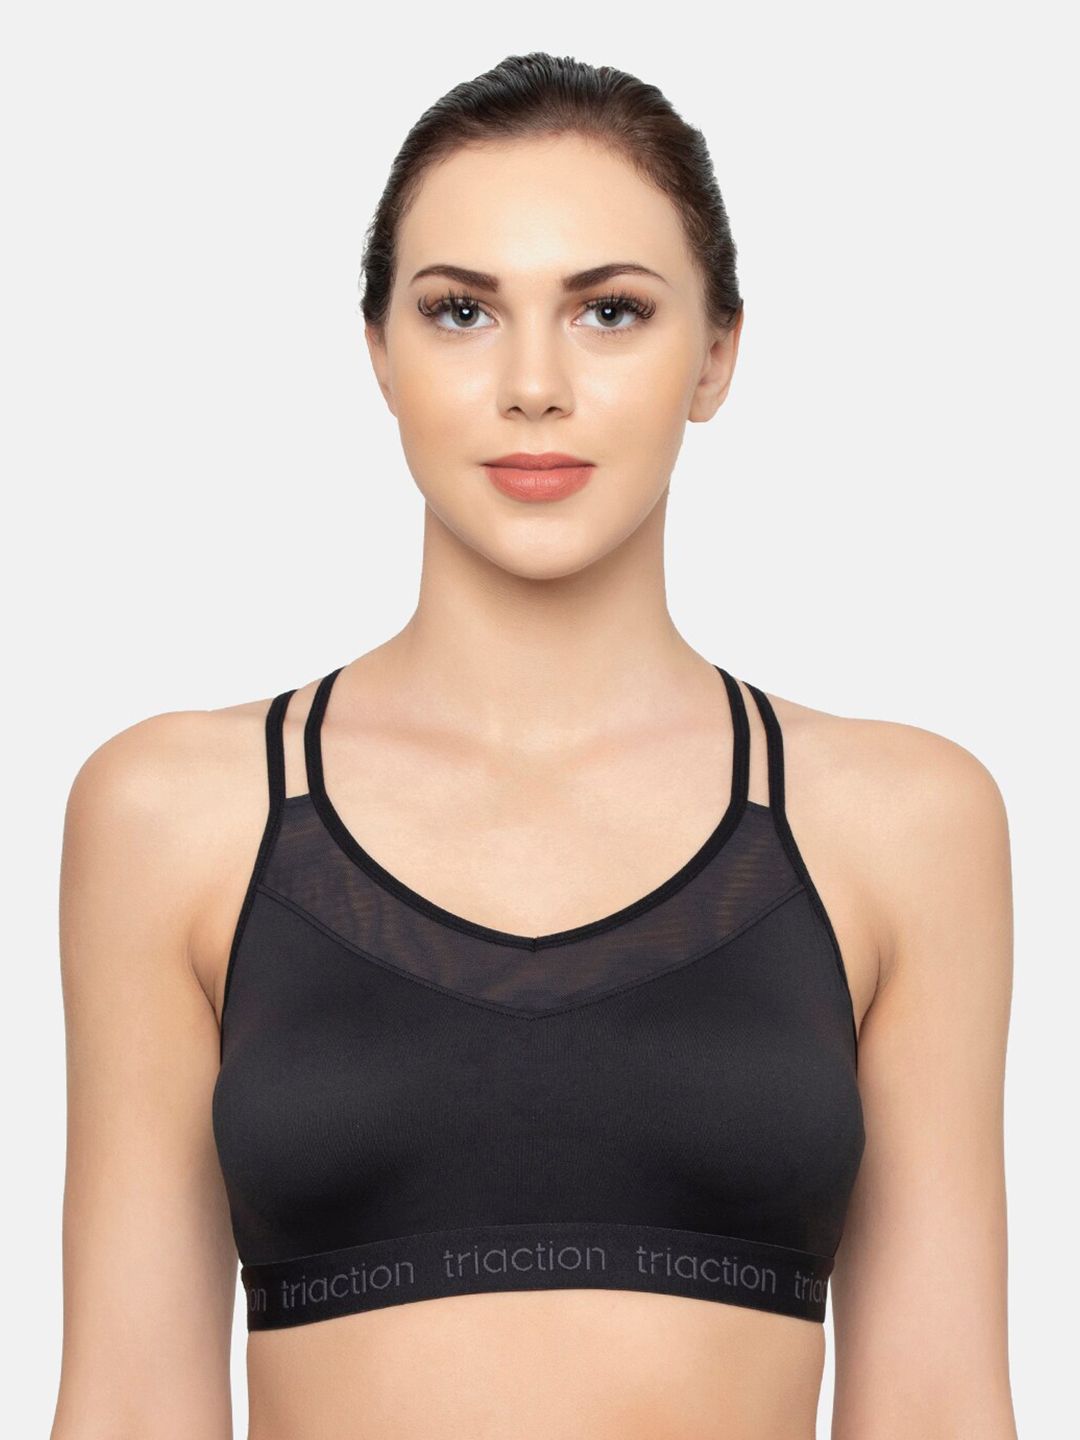 Triumph Triaction Balance Tops Padded Wireless Low Intensity Workout Sports Bra Price in India